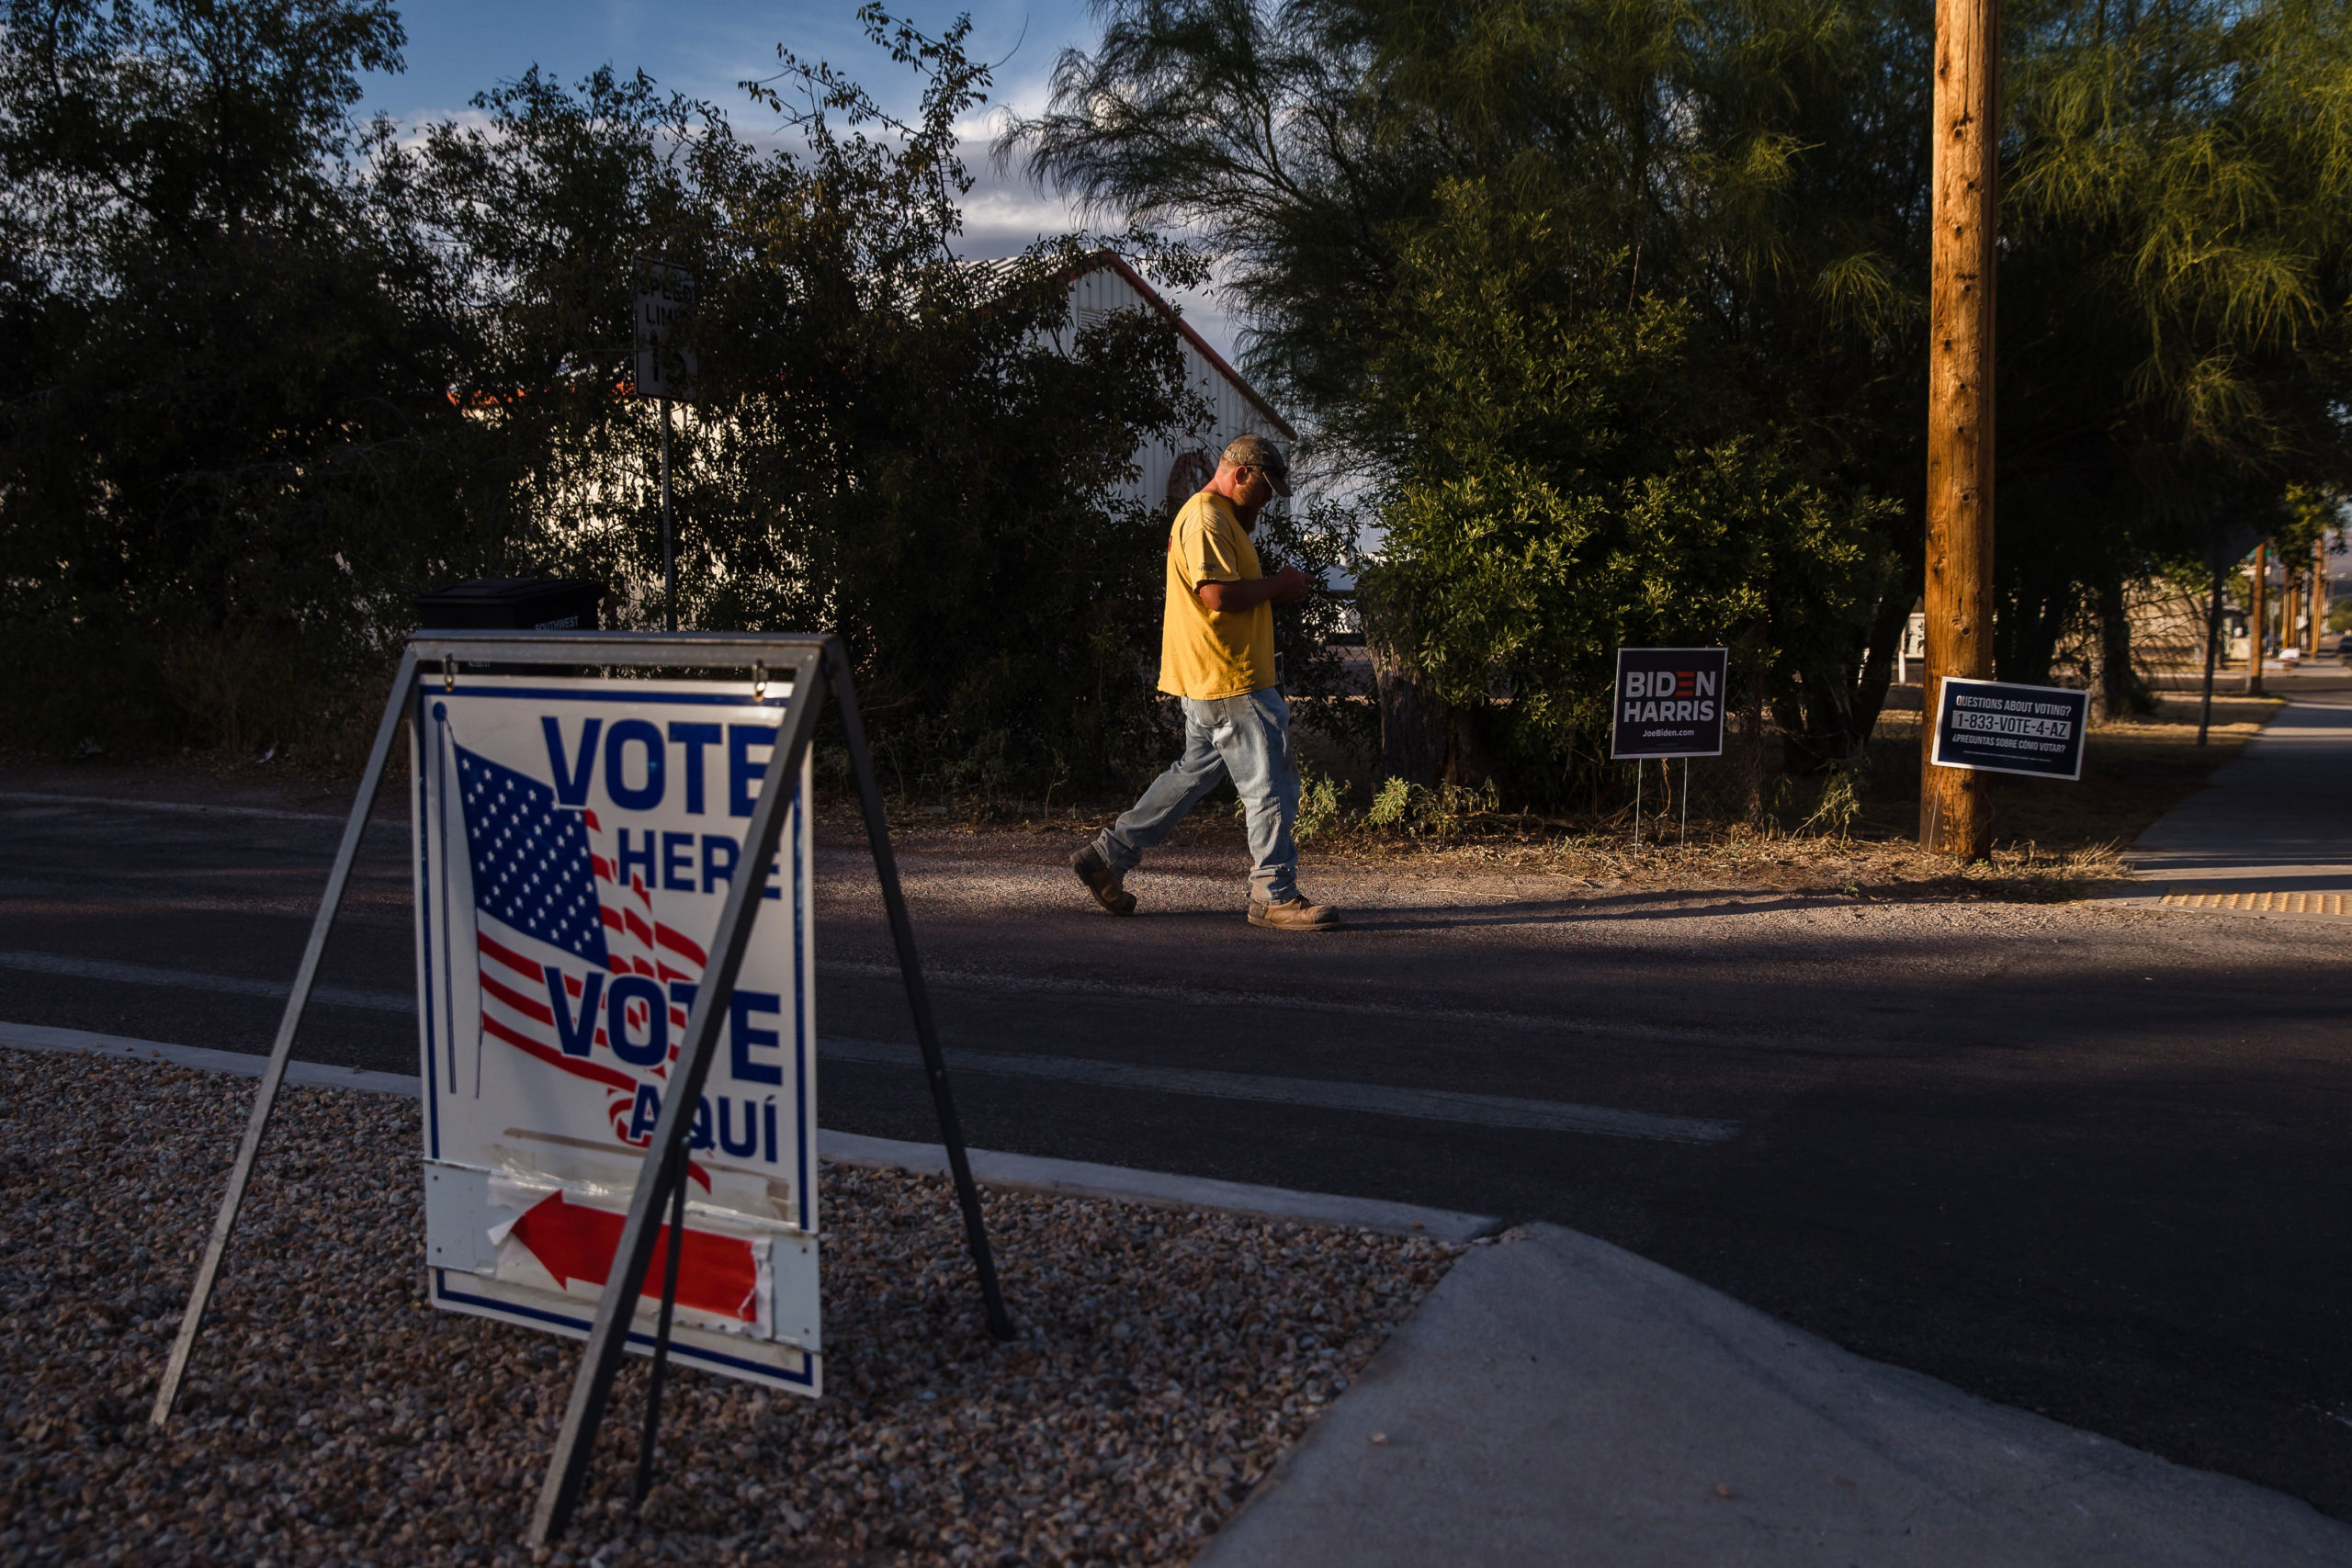 A man leaves a polling station at the Benson School District Board Room in Benson, Arizona, on November 3, 2020. - The US started voting Tuesday in an election amounting to a referendum on Donald Trump's uniquely brash and bruising presidency, which Democratic opponent and frontrunner Joe Biden urged Americans to end to restore "our democracy." (Photo by ARIANA DREHSLER / AFP) (Photo by ARIANA DREHSLER/AFP via Getty Images)